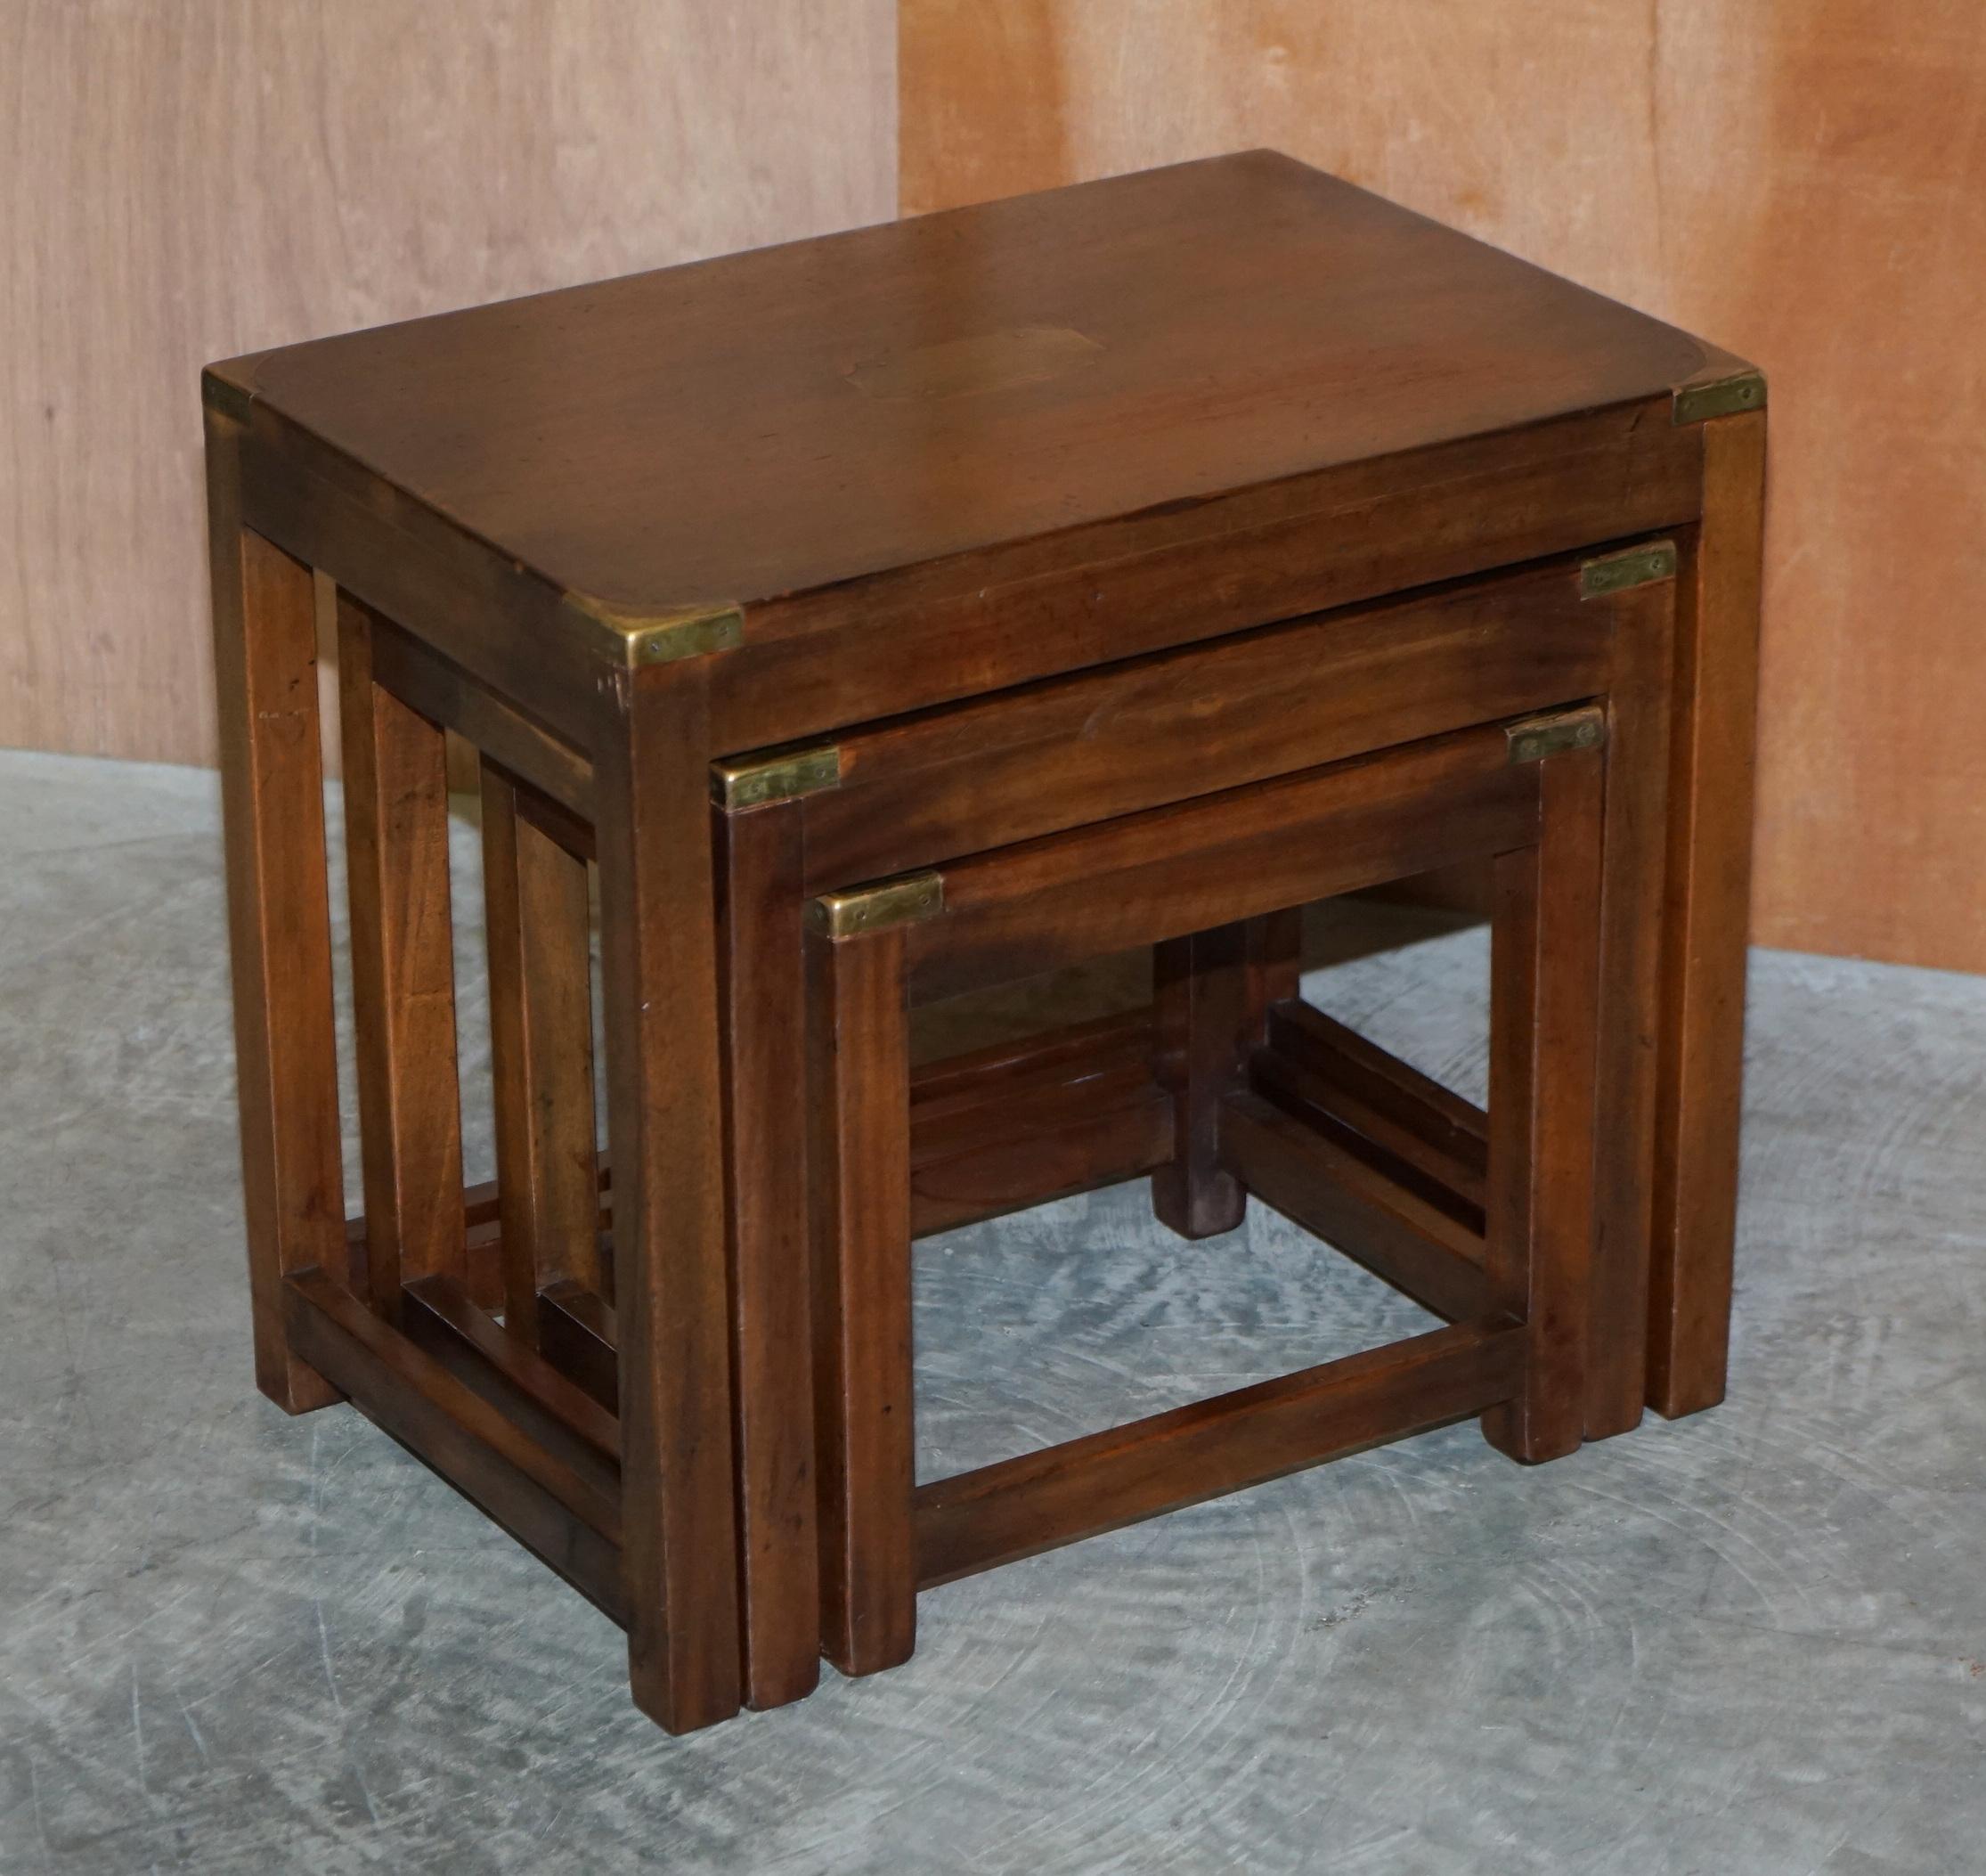 We are delighted to offer for sale this stunning and really quite rare, Kennedy furniture Harrods London Military Campaign nest of side tables

A good looking and well-made suite, absolutely iconic and highly collectable, I never really see the